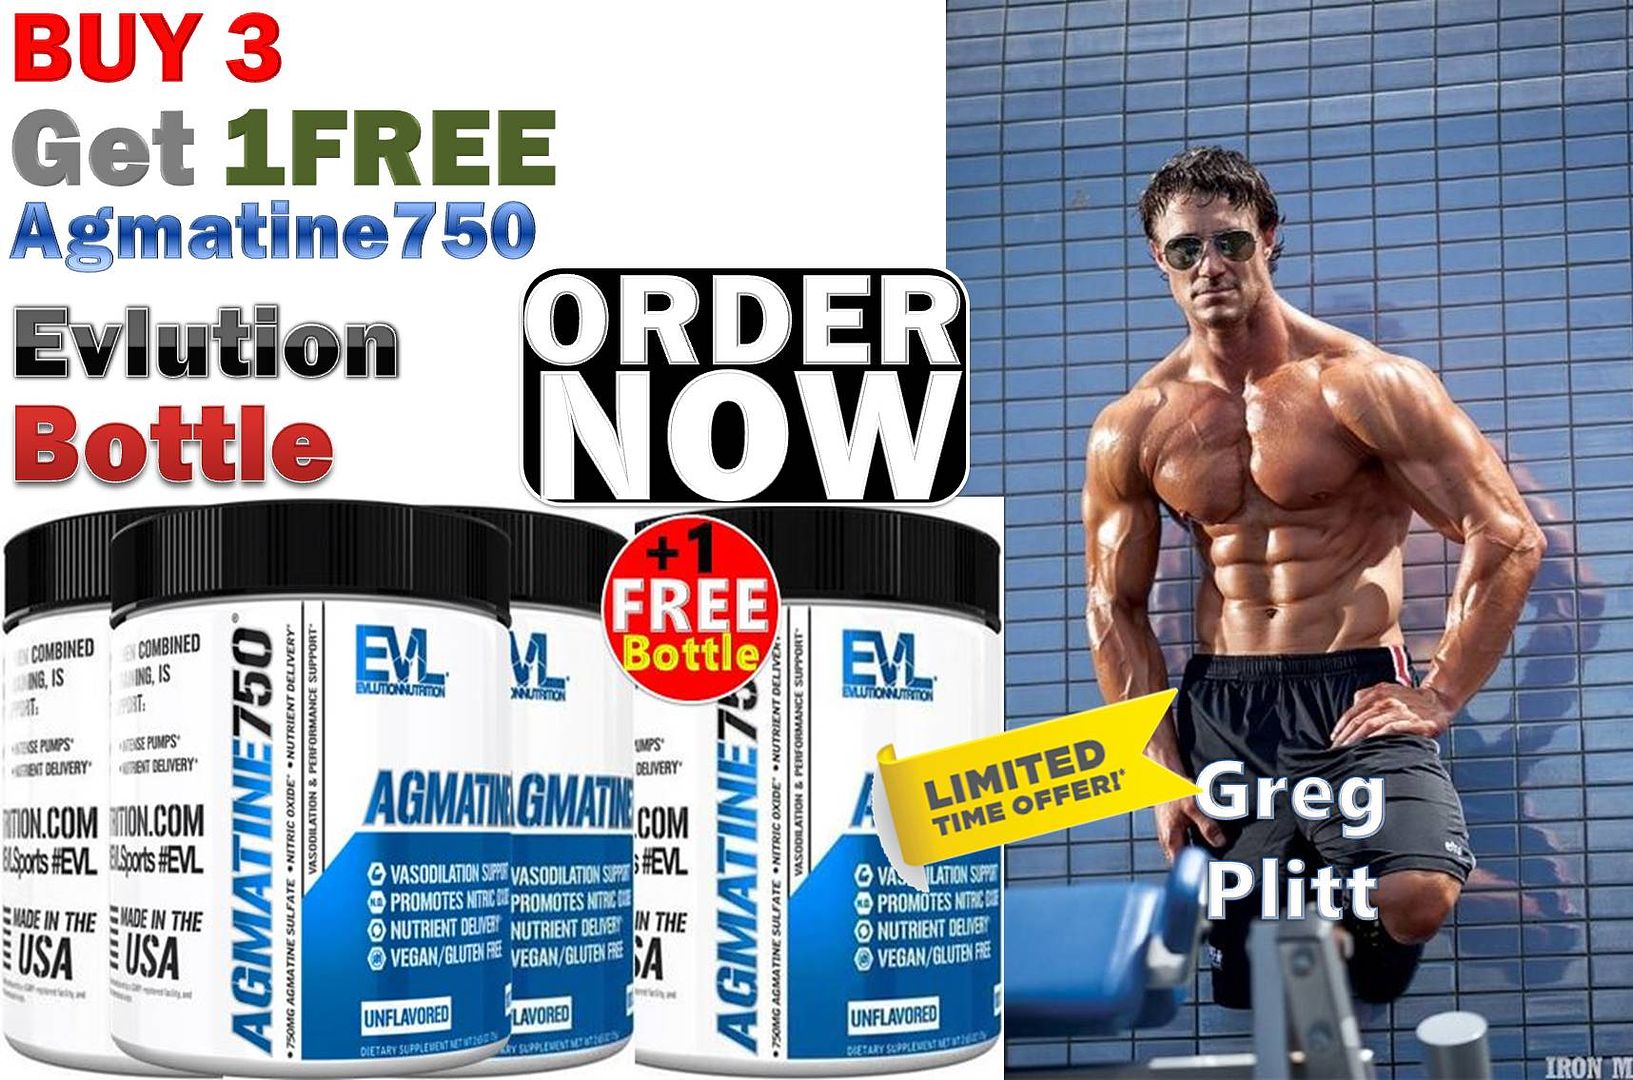 Agmatine750 Evlution by Evlution Nutrition